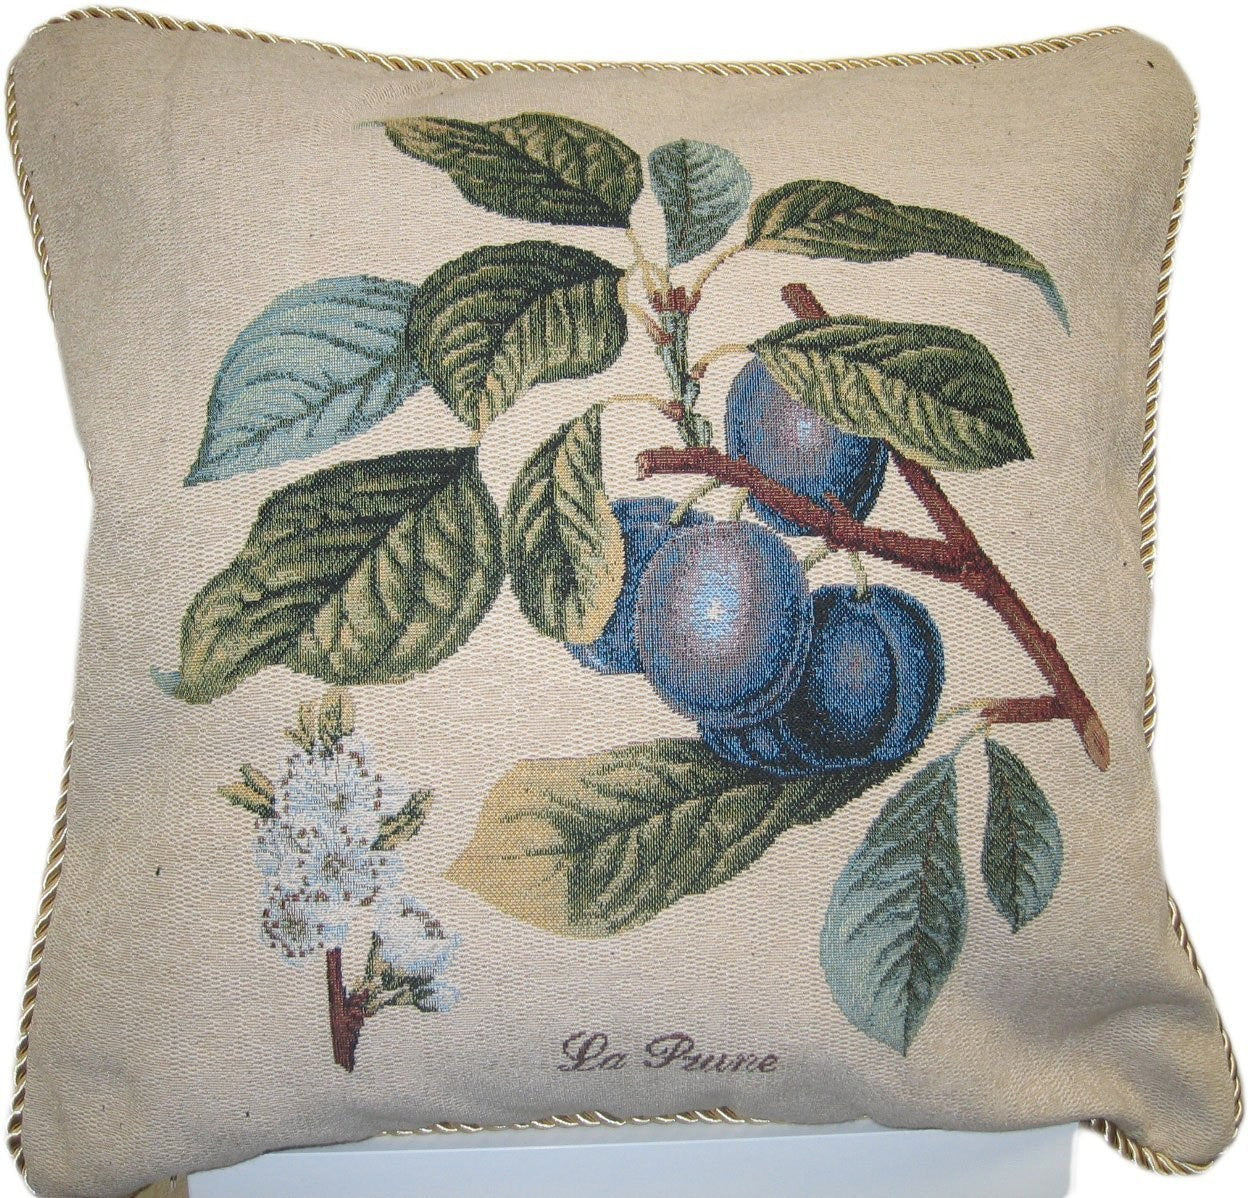 Sugar Plum Fruit Visions Elegant Novelty Woven Square Accent Cushion Cover Throw Toss Pillow Case - 18" - 1-Piece - Stores Basement - Discount Bedding